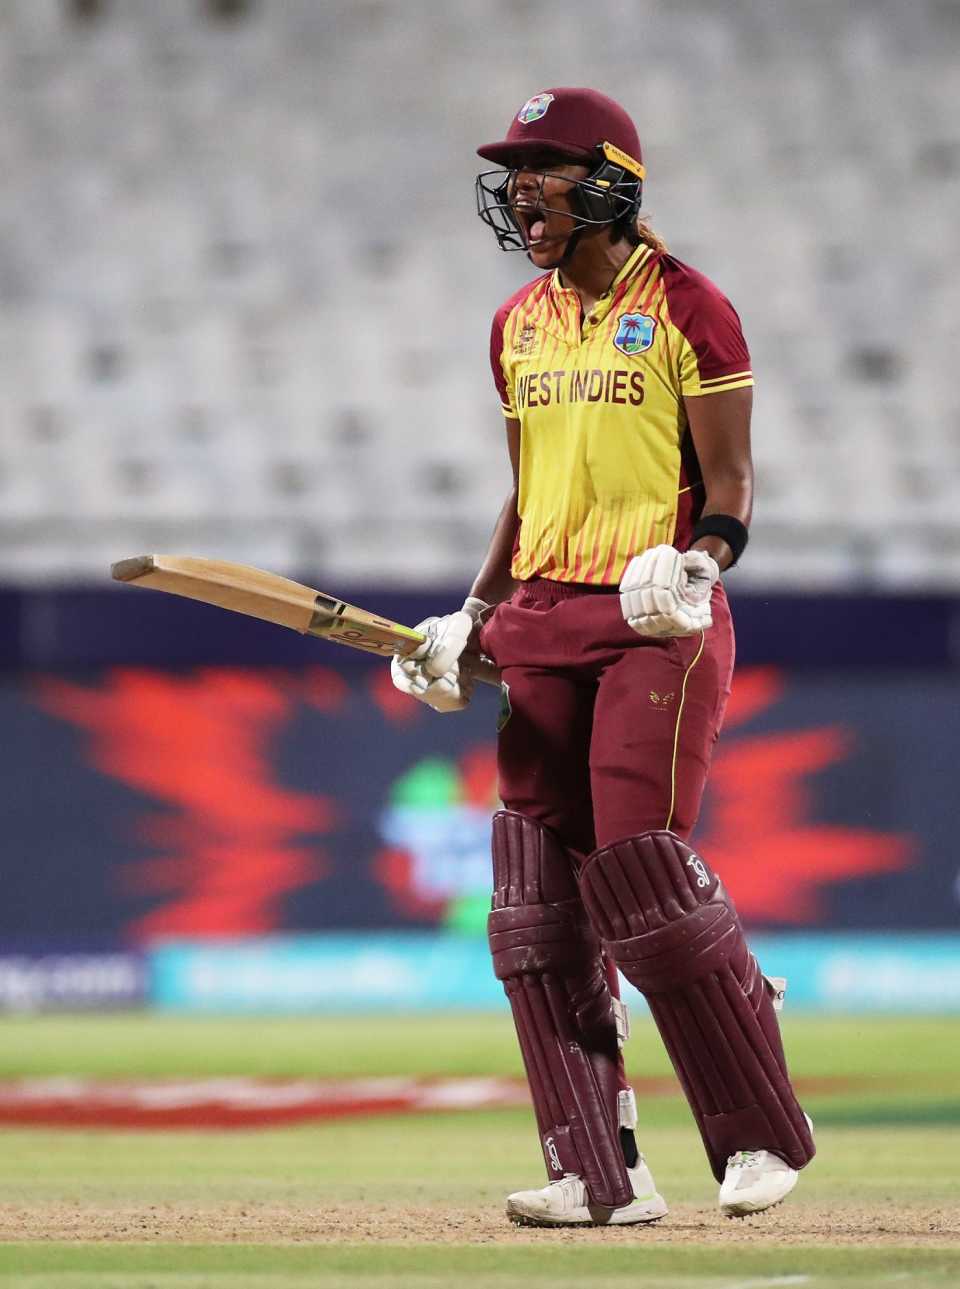 Hayley Matthews lets out a roar after West Indies ended their 15-match losing streak in T20Is, Ireland vs West Indies, Women's T20 world Cup, Cape Town, February 17, 2023